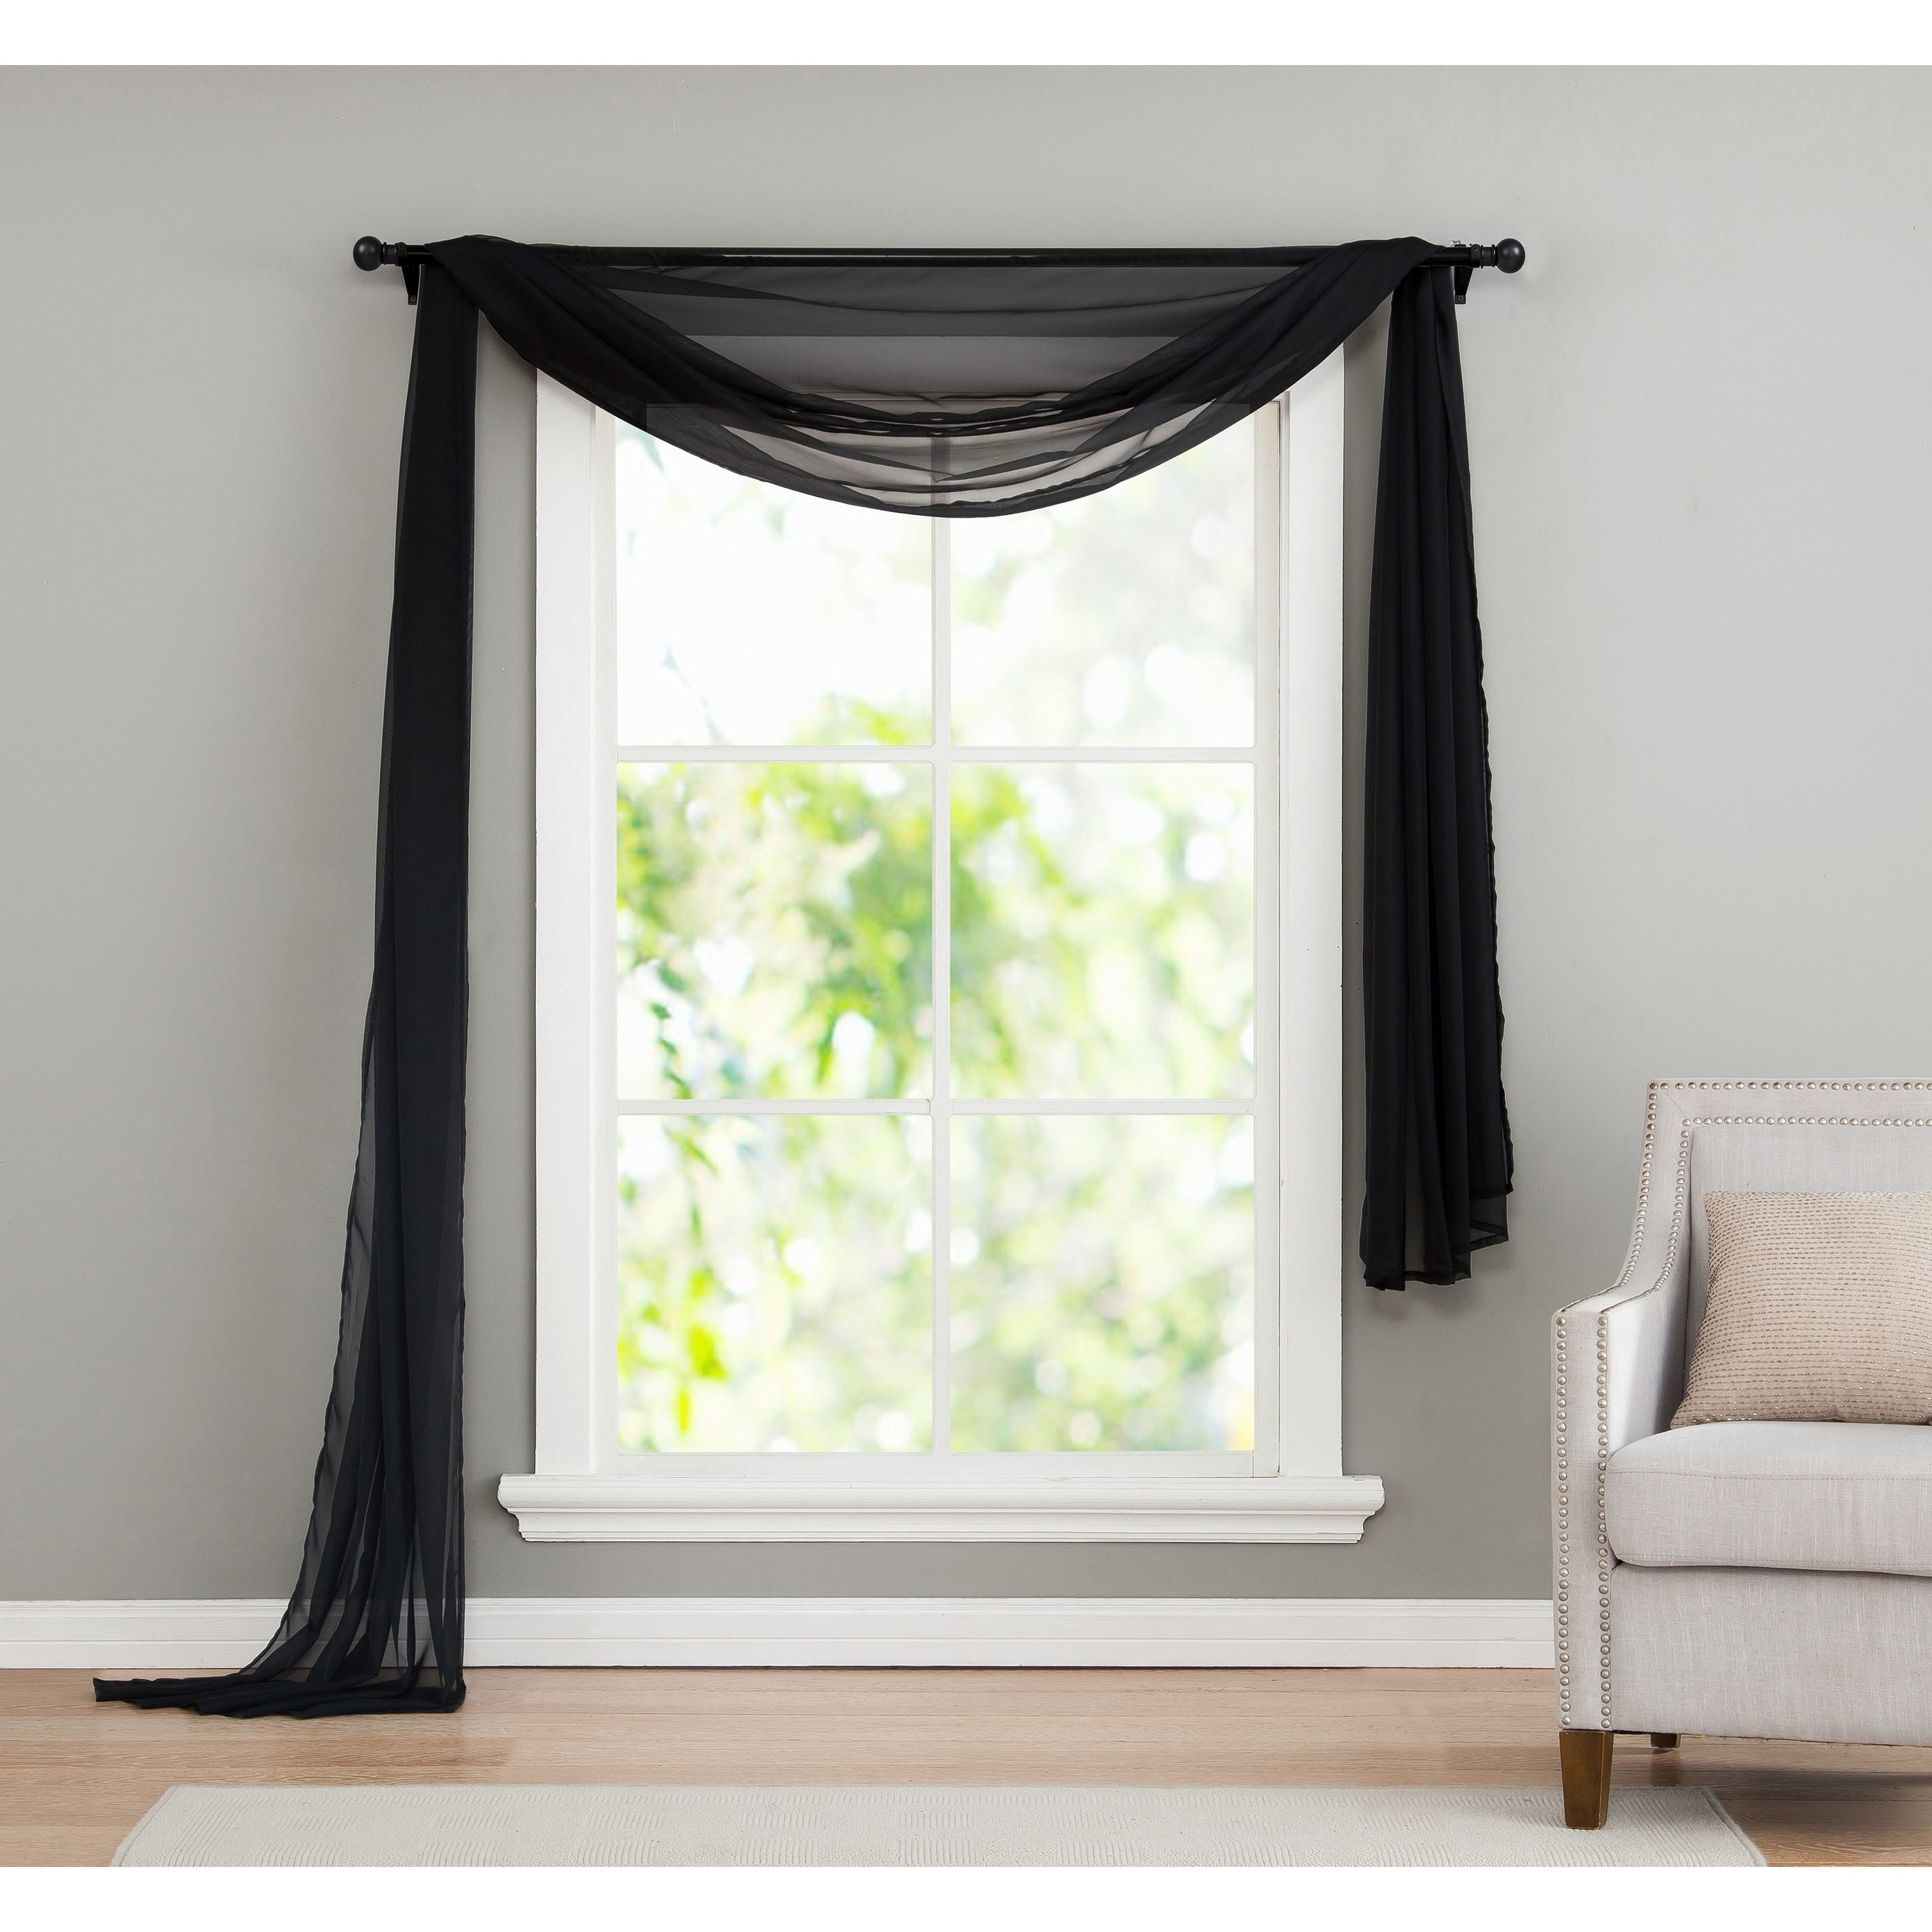 Buy Valances Online At Overstock Our Best Window Treatments Deals